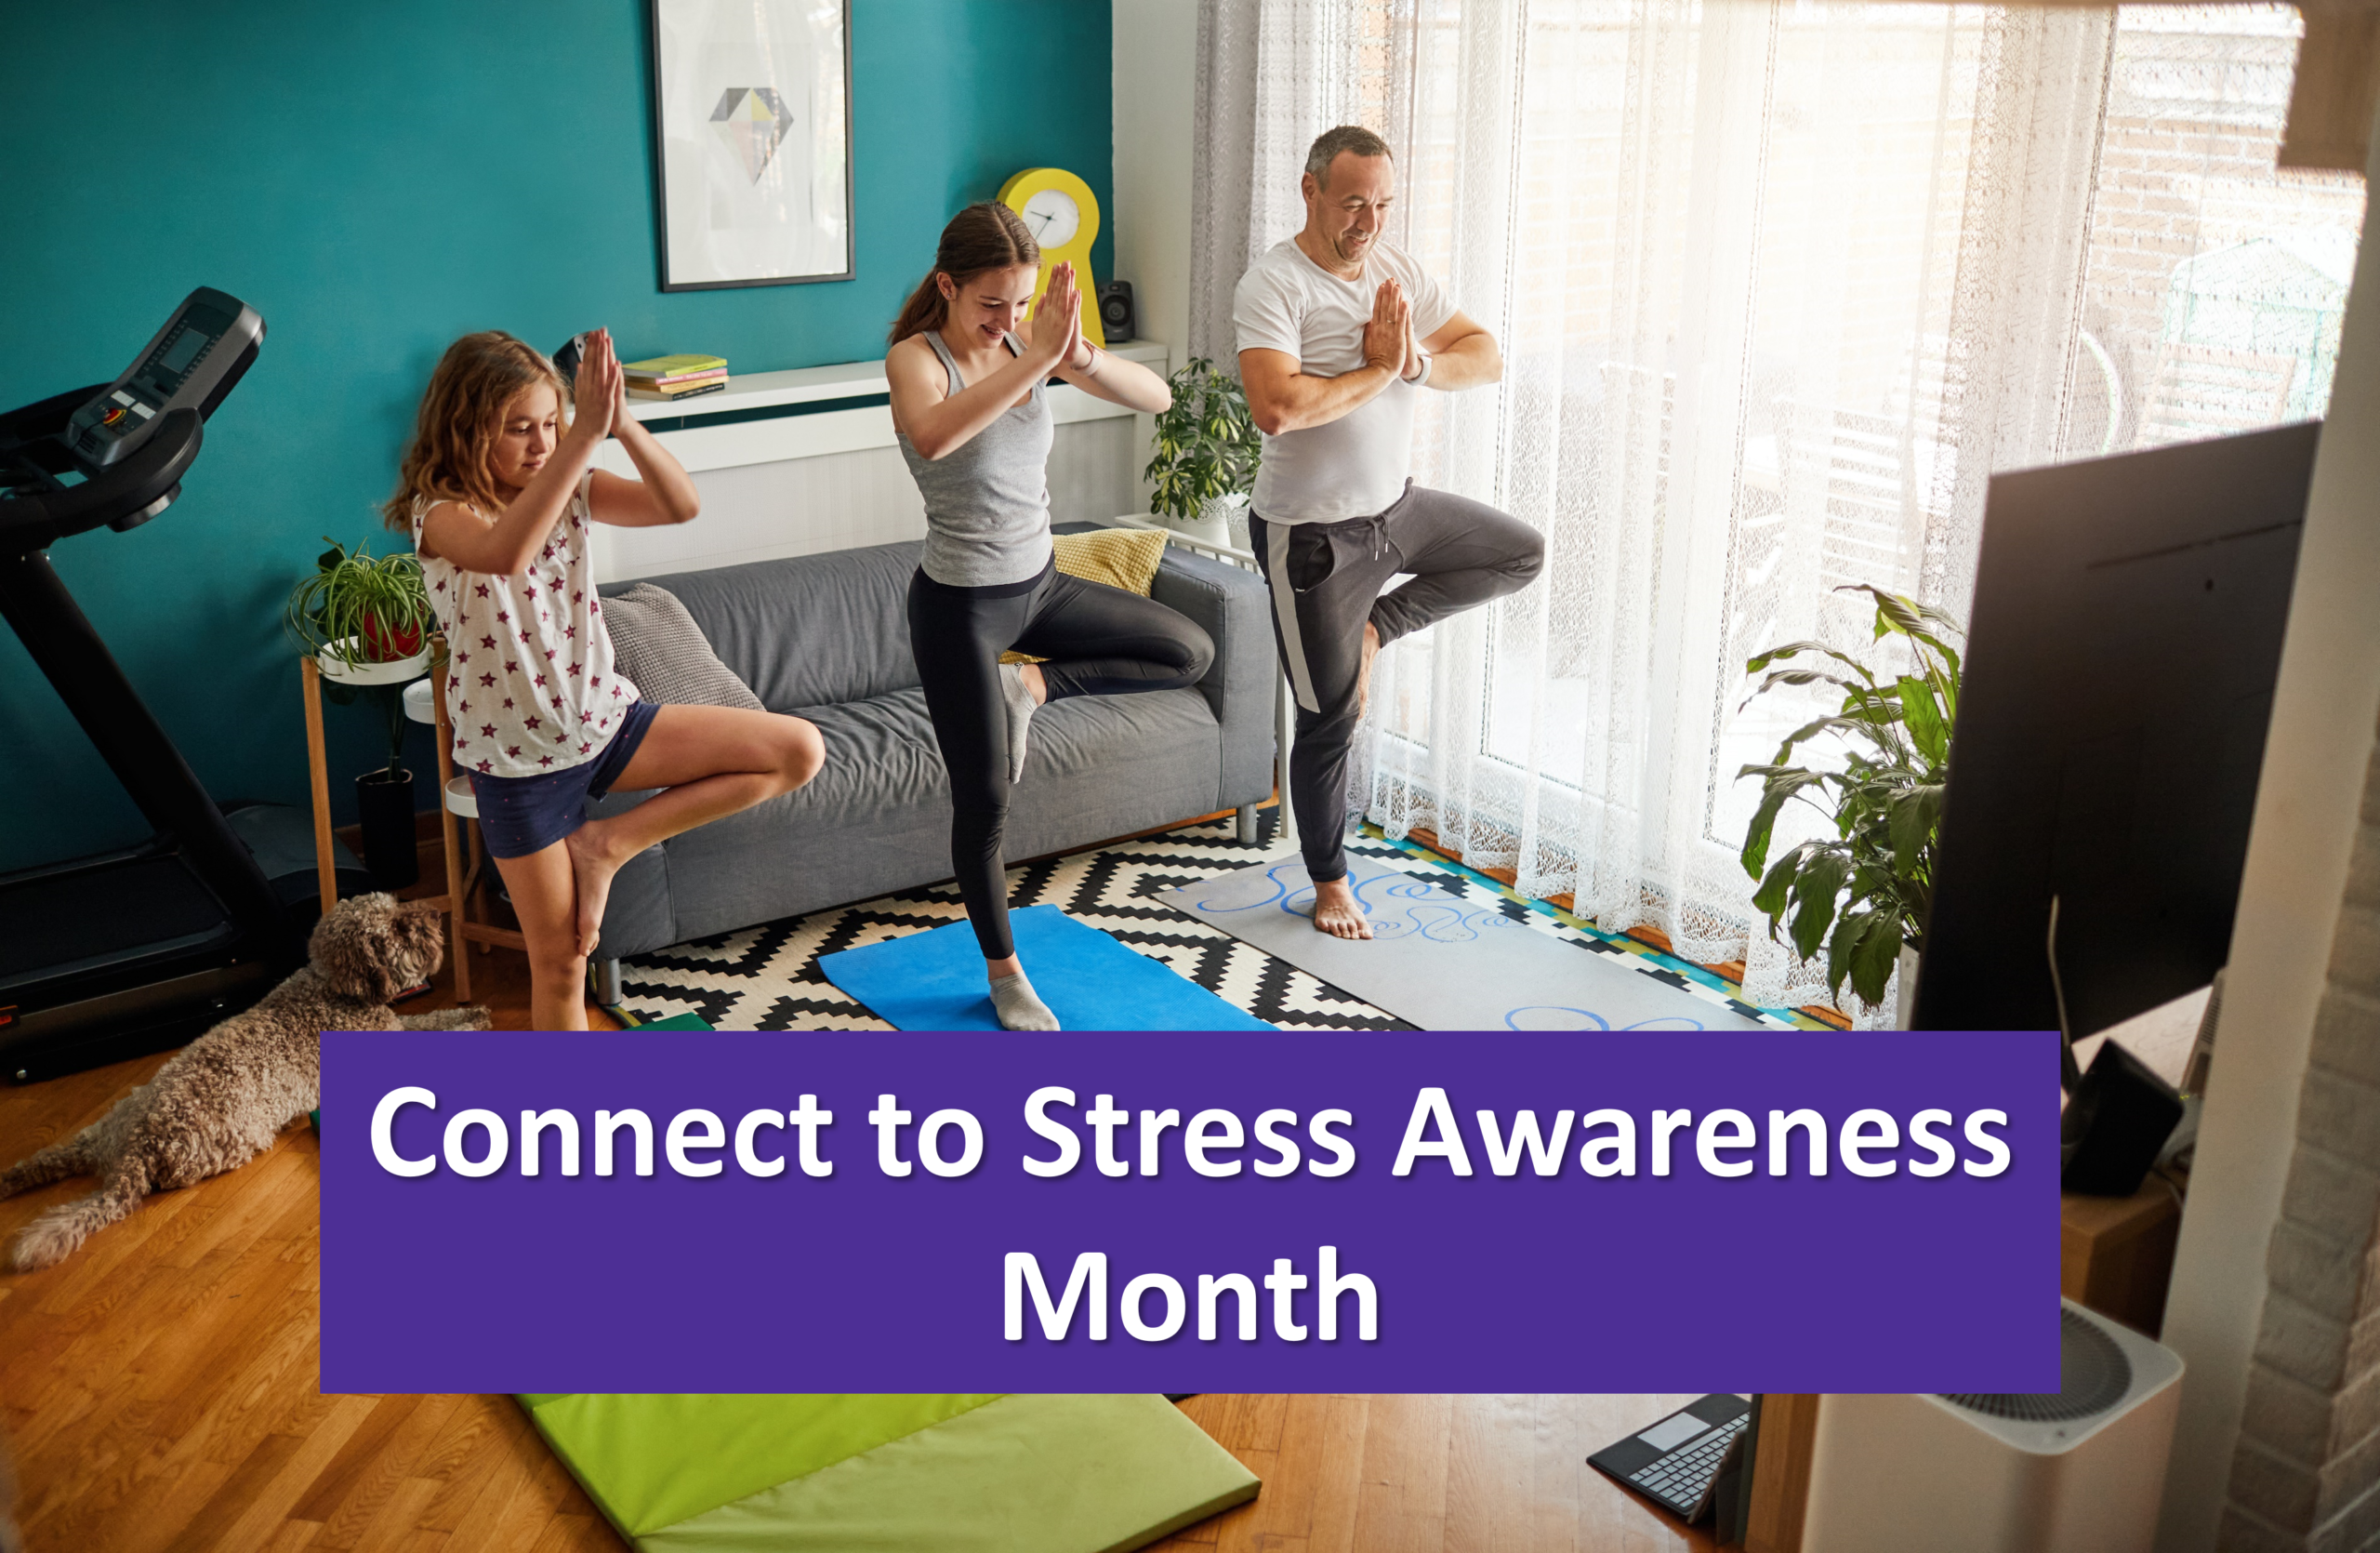 Learn about tech and Stress Awareness Month